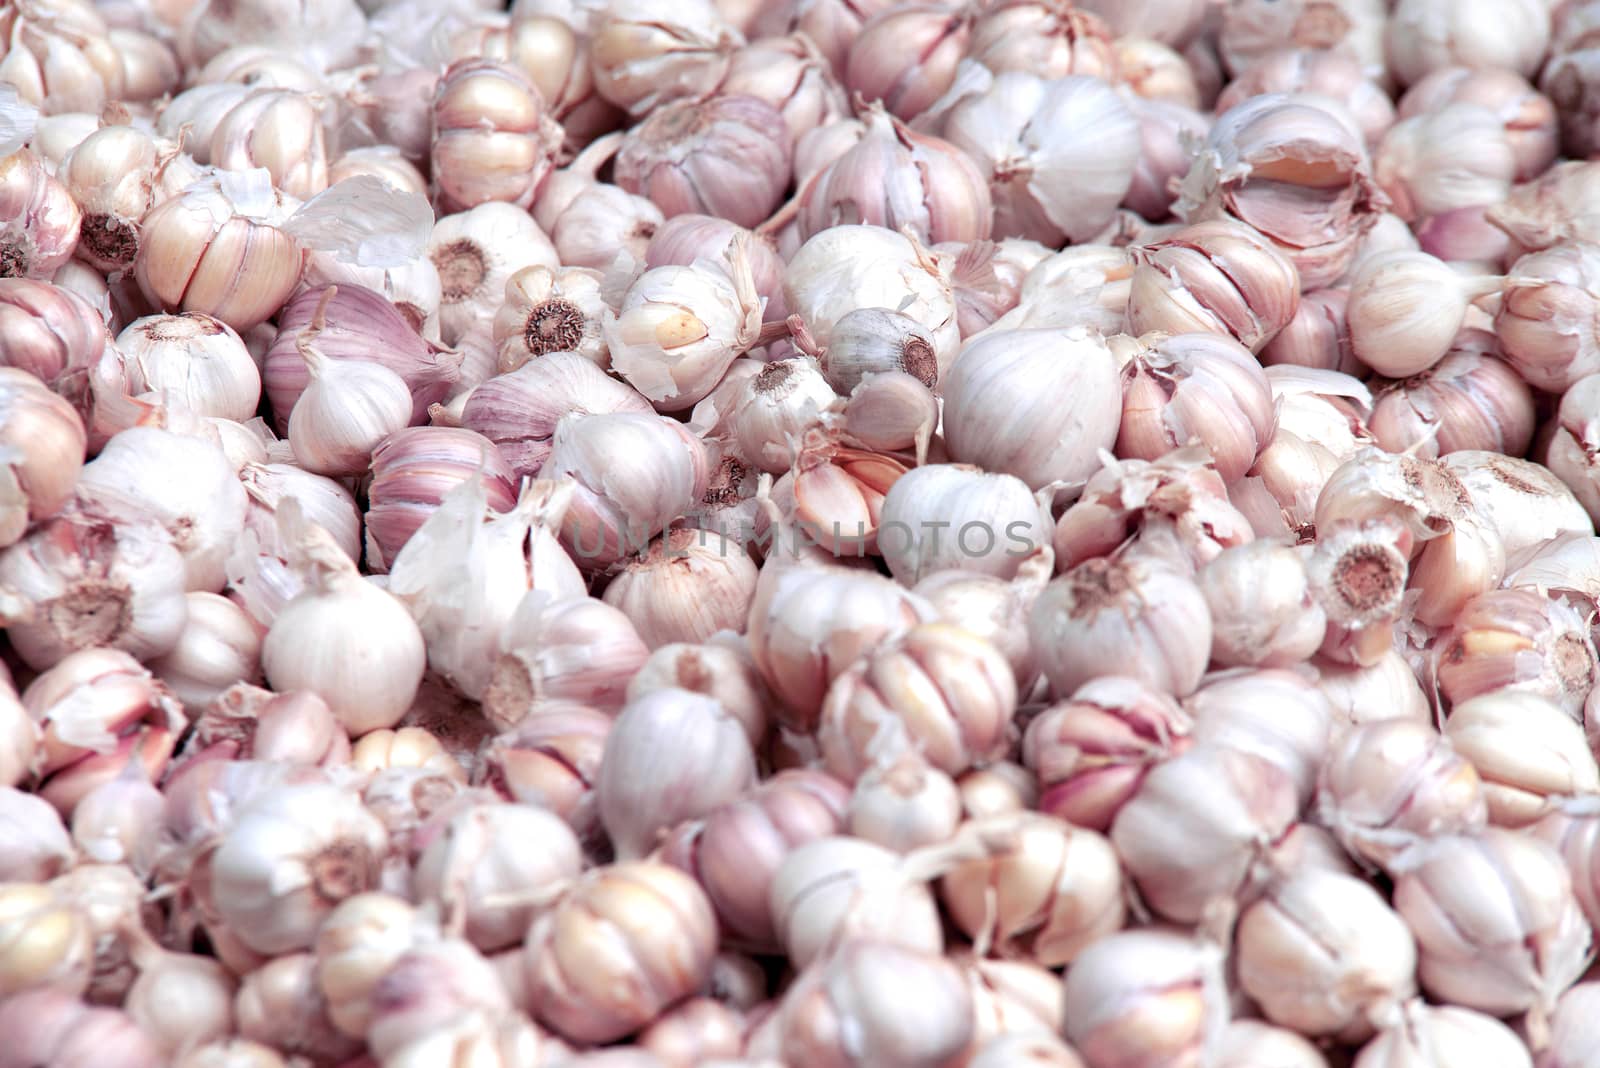 Group of garlic on market stand